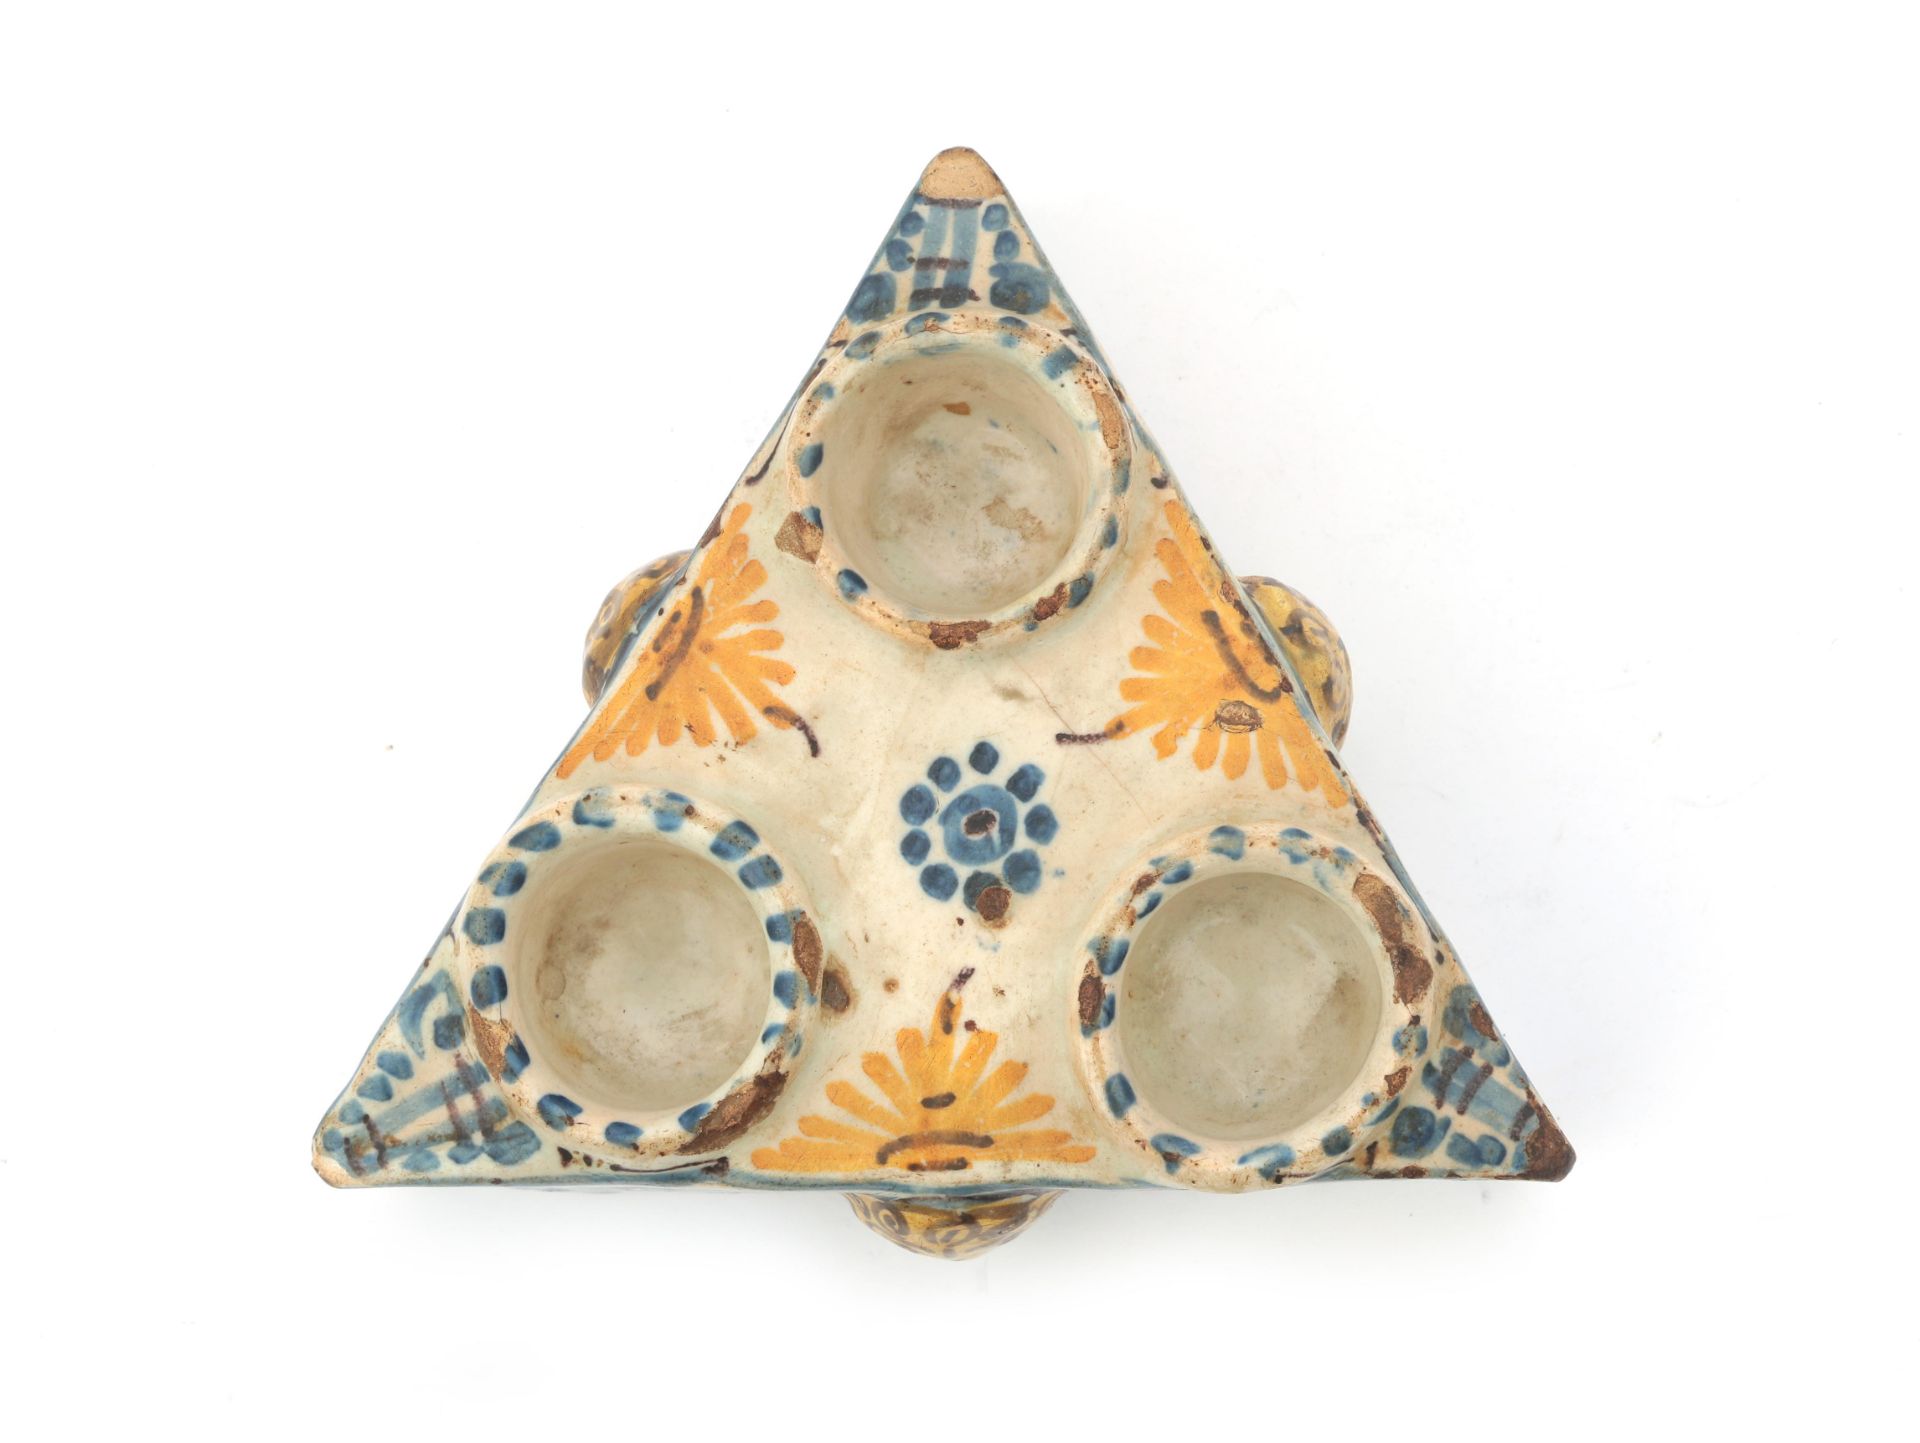 A Talavera majolica spice holder / salt cellar with decor in blue and yellow, adorned with - Image 5 of 5